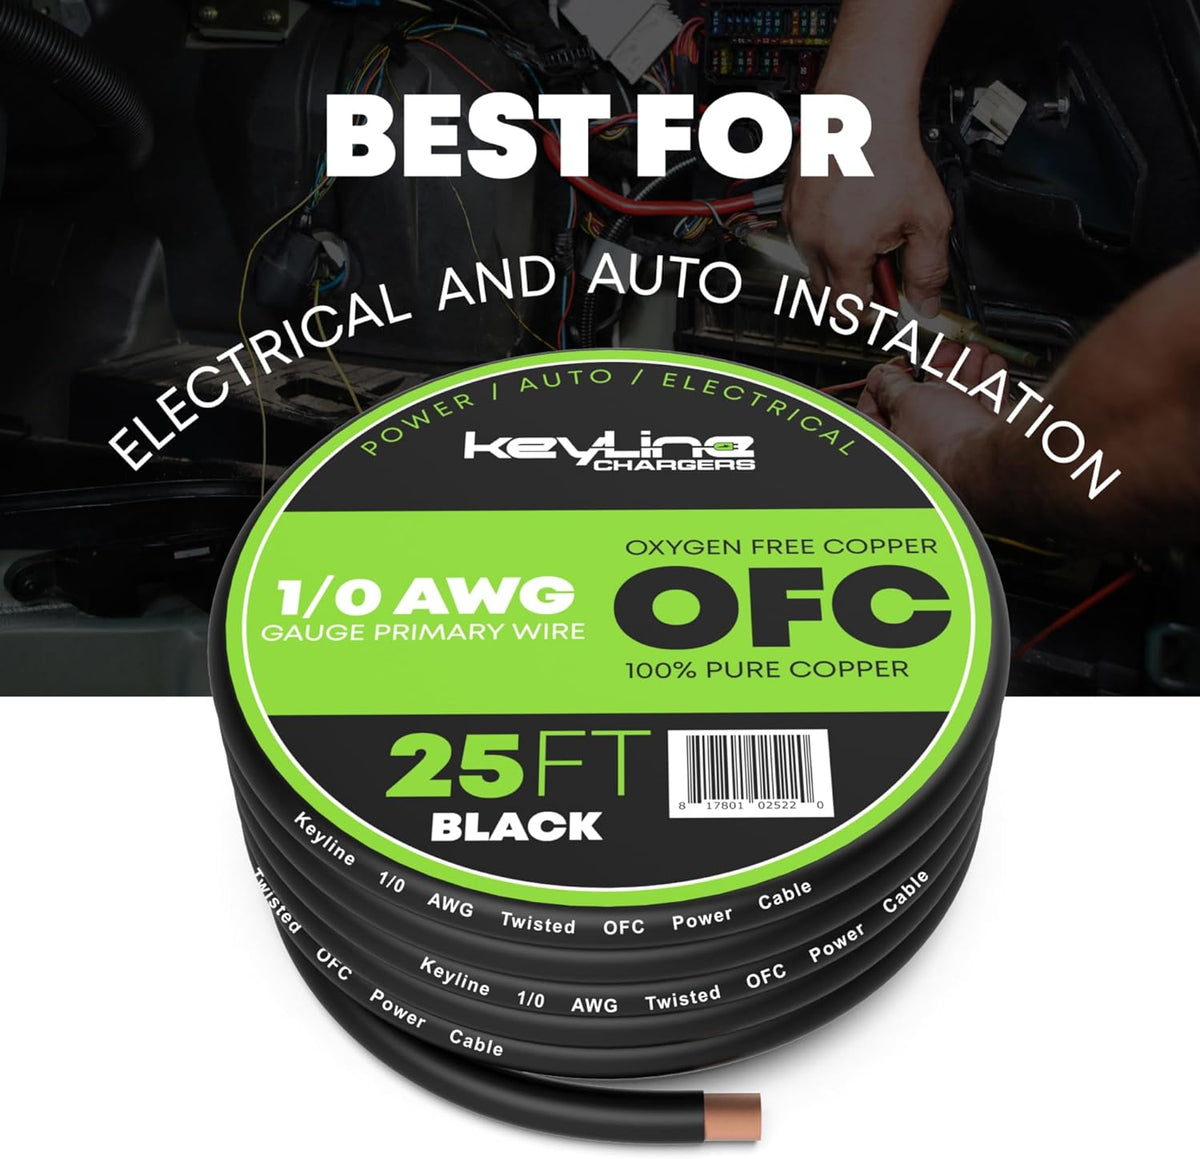 OFC Black 1/0 AWG Gauge Wire Oxygen Free Copper - (25ft), Automotive Wire, Power/Ground, Battery Cable, True Spec Welding & Automotive, Car Audio Speaker, RV Trailer, Amp Wiring by Keyline Chargers